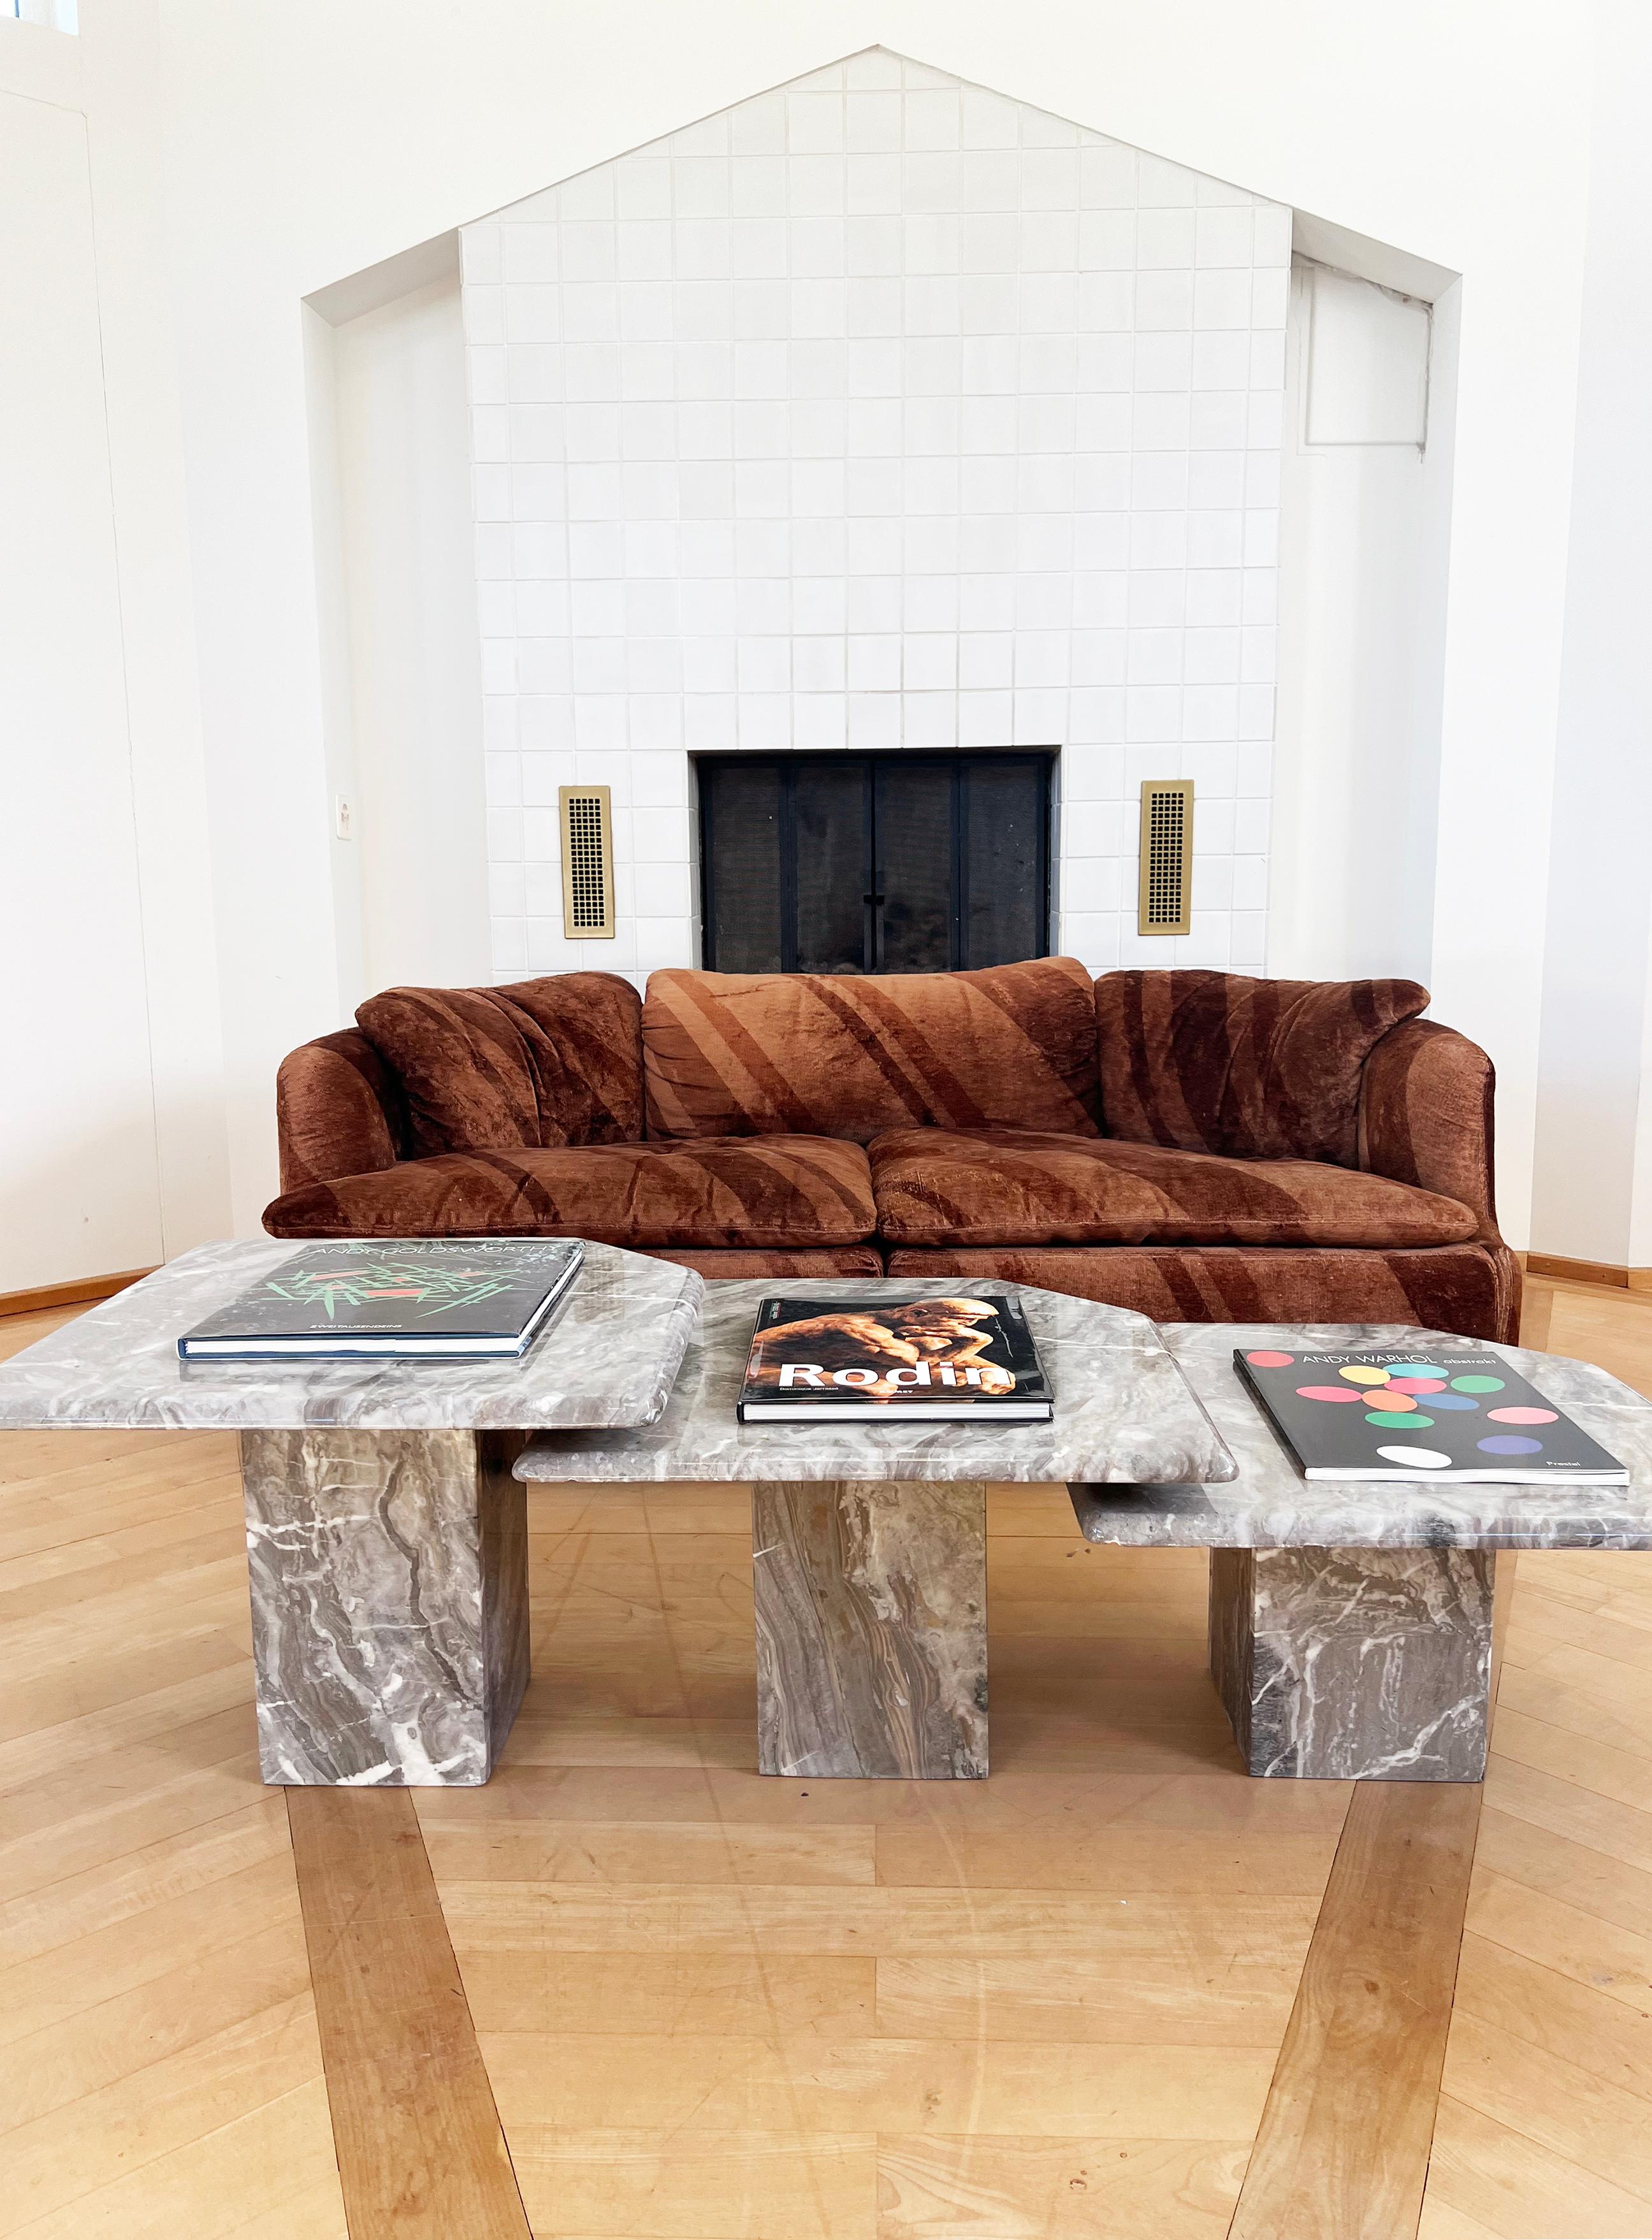 Beautiful solid marble nesting tables, with differing heights, to nest accordingly. 
Can be arranged in many different configurations. 
Incredible veining on the marble. Stunning set. 

Excellent set.

Dimensions:

Plates: 55 x 55 cm / 21 5/8